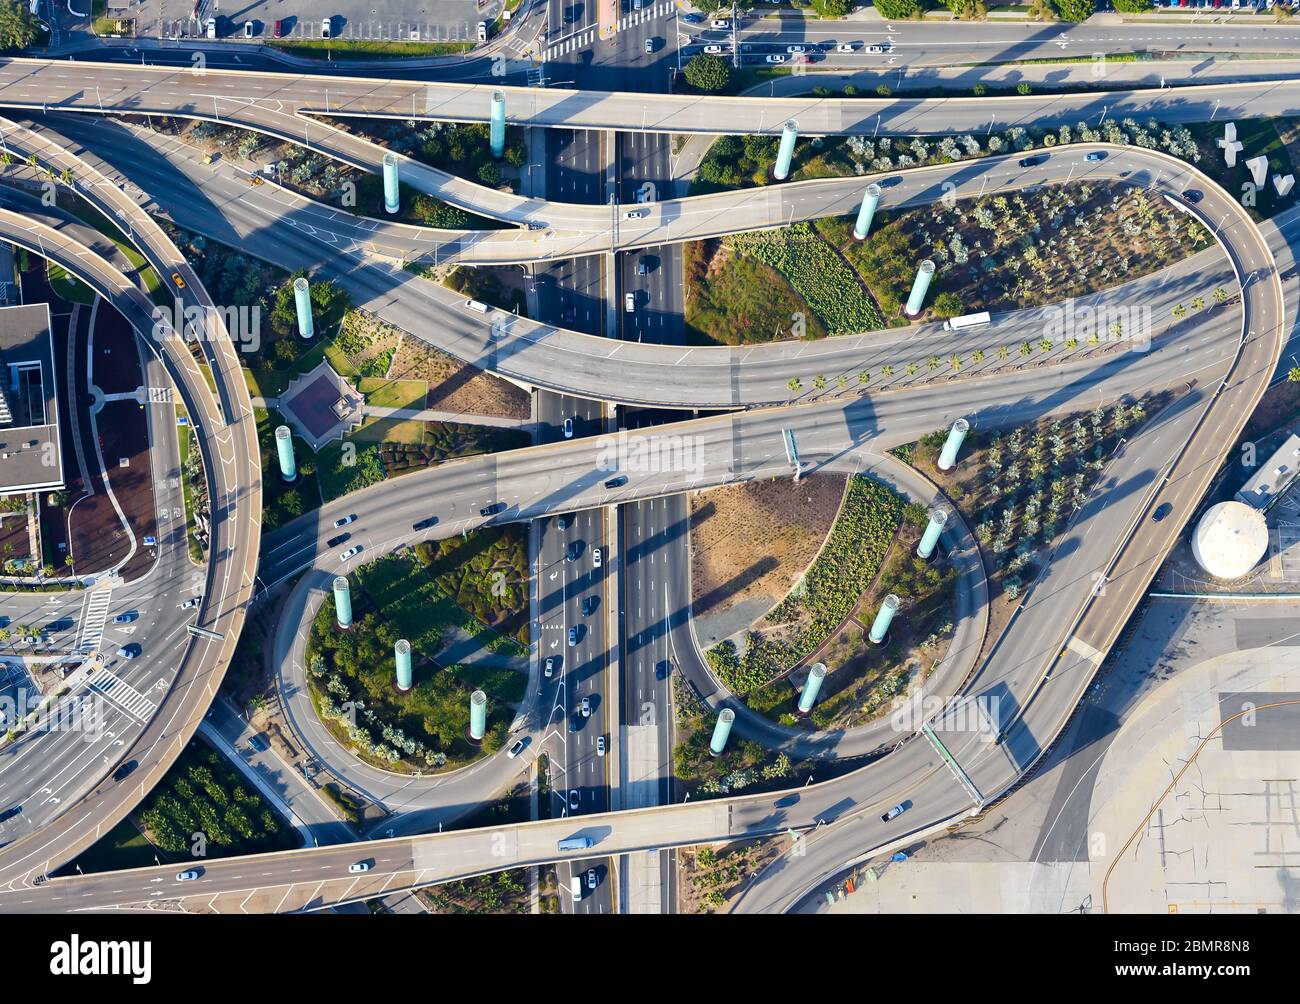 Iconic LAX Airport Gateway Pylon aerial view showing multiple road intersections and interchanges. Public art in form of columns. Los Angeles, CA, USA. Stock Photo